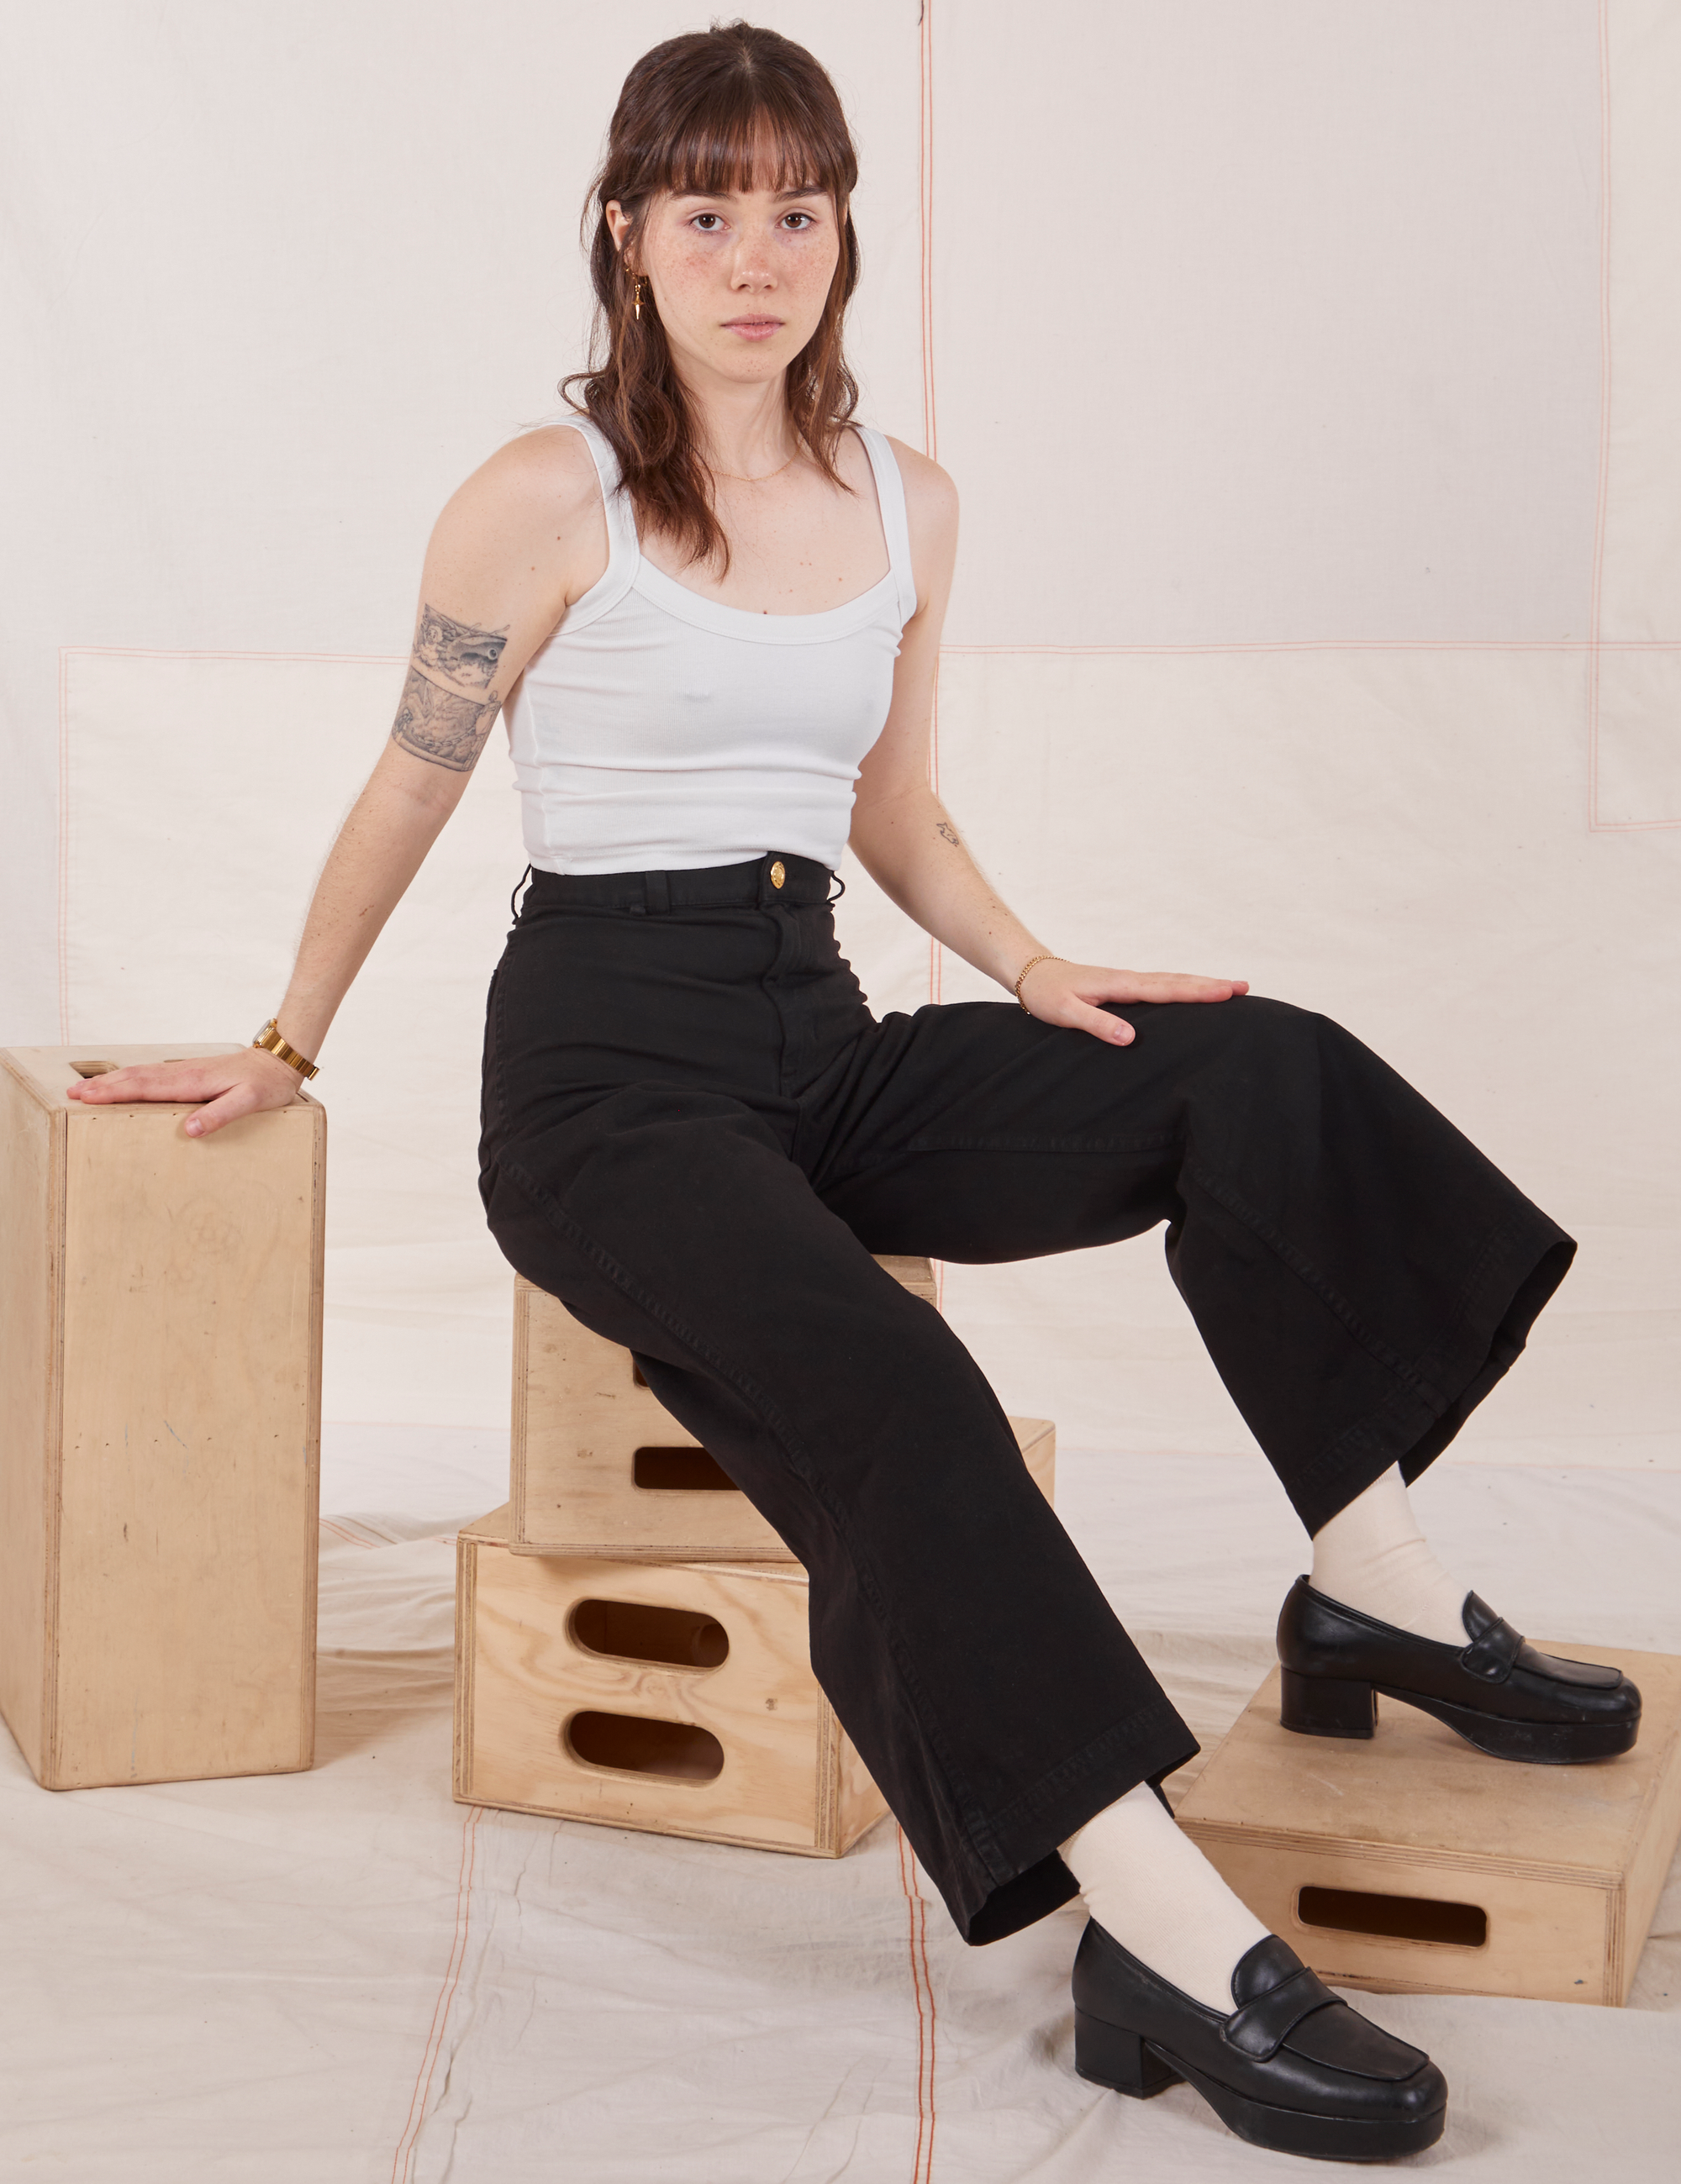 Hana is wearing Petite Bell Bottoms in Basic Black and Cropped Cami in vintage off-white